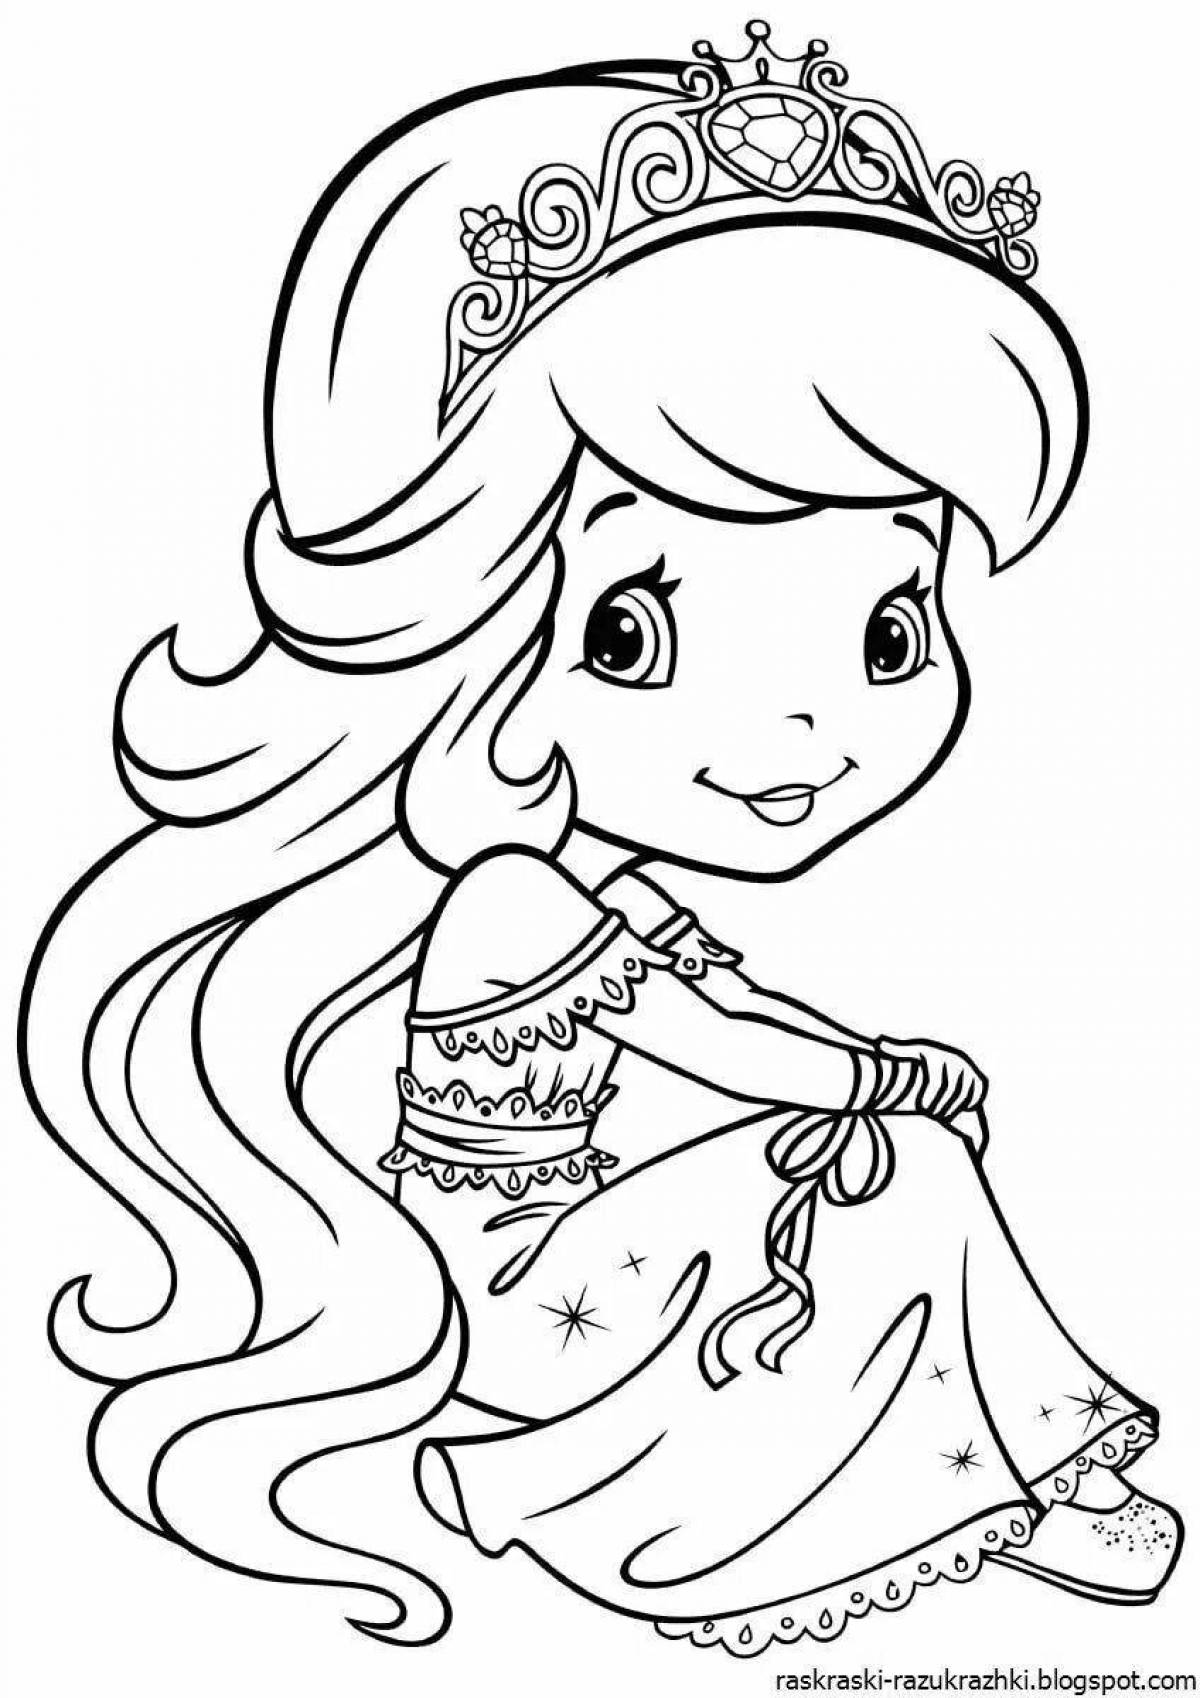 Exotic princess coloring pages for girls 4-5 years old